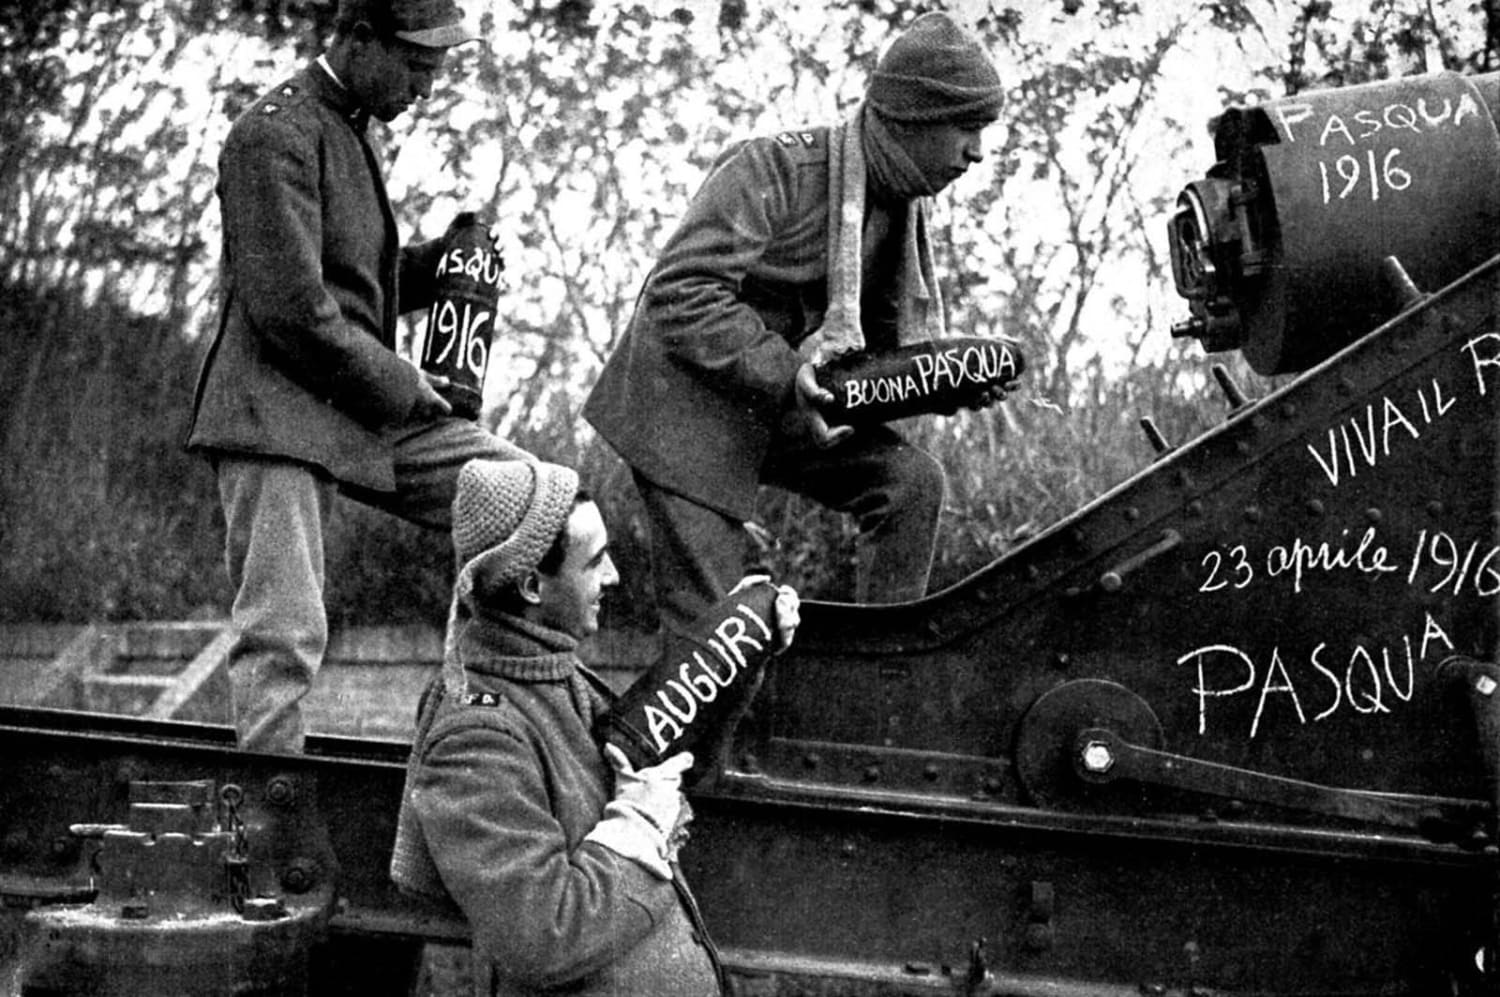 Italian artillery gunners load shells decorated with Easter messages during WW1. Italy, 1916.